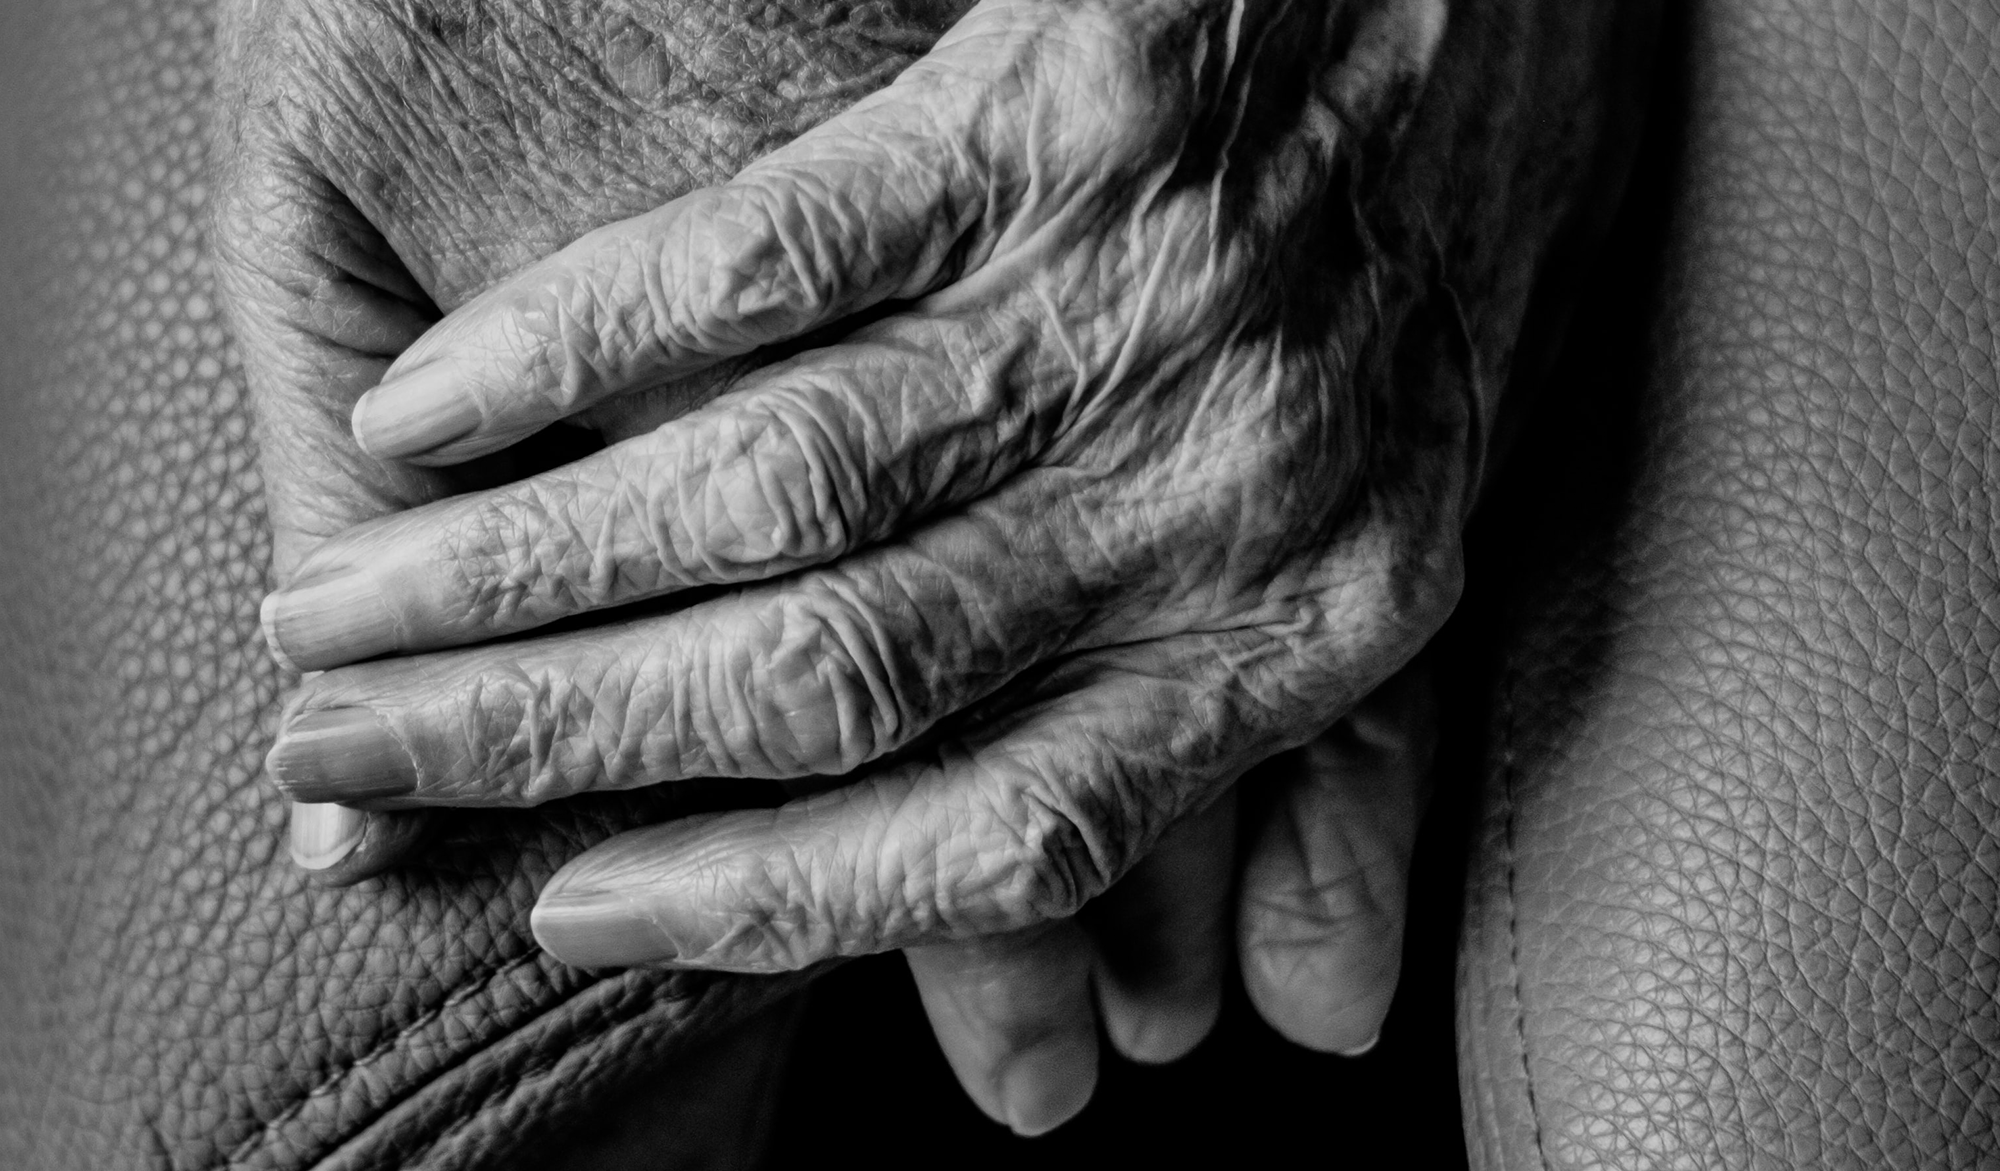 aged hands